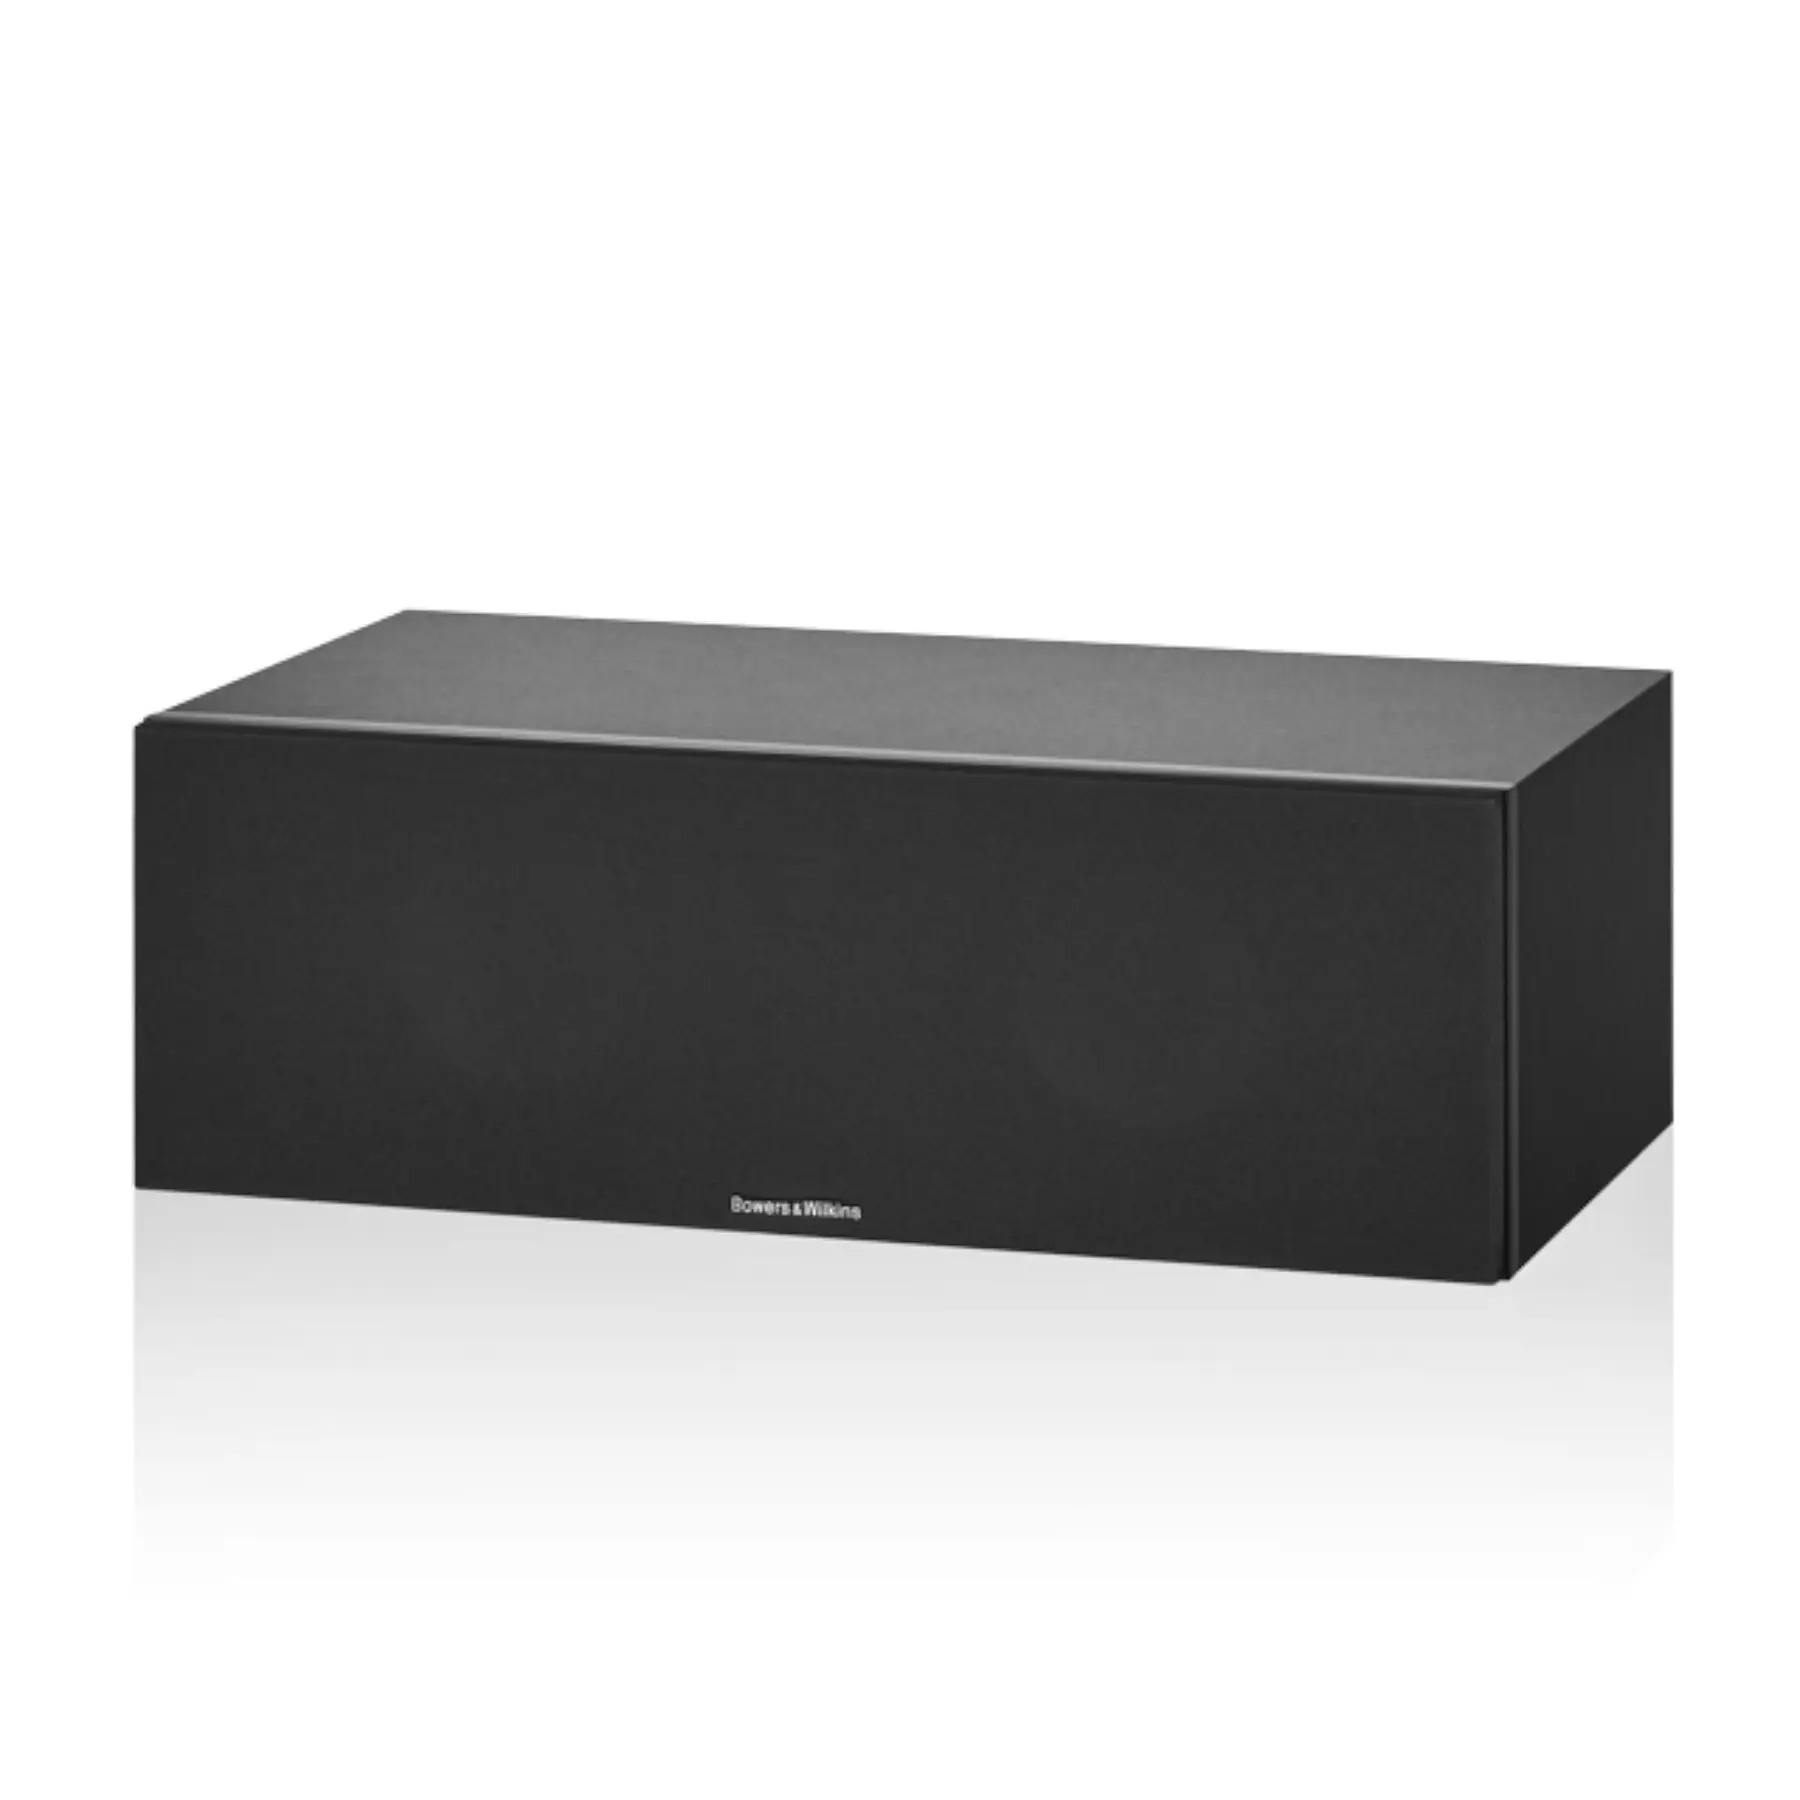 Bowers & Wilkins HTM6 S2 Anniversary Edition Black 180110